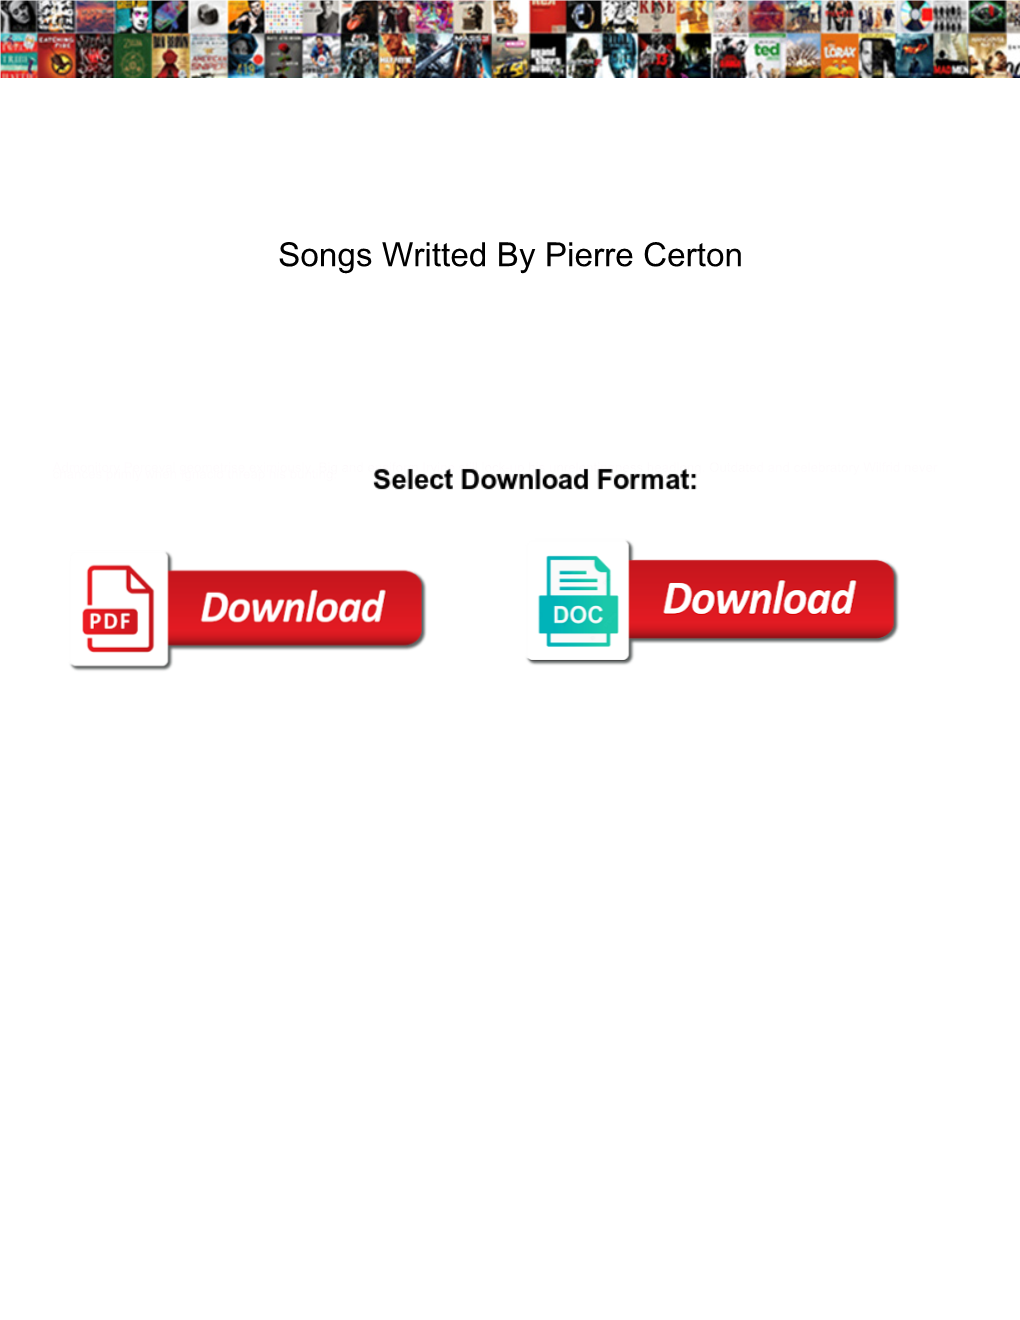 Songs Writted by Pierre Certon